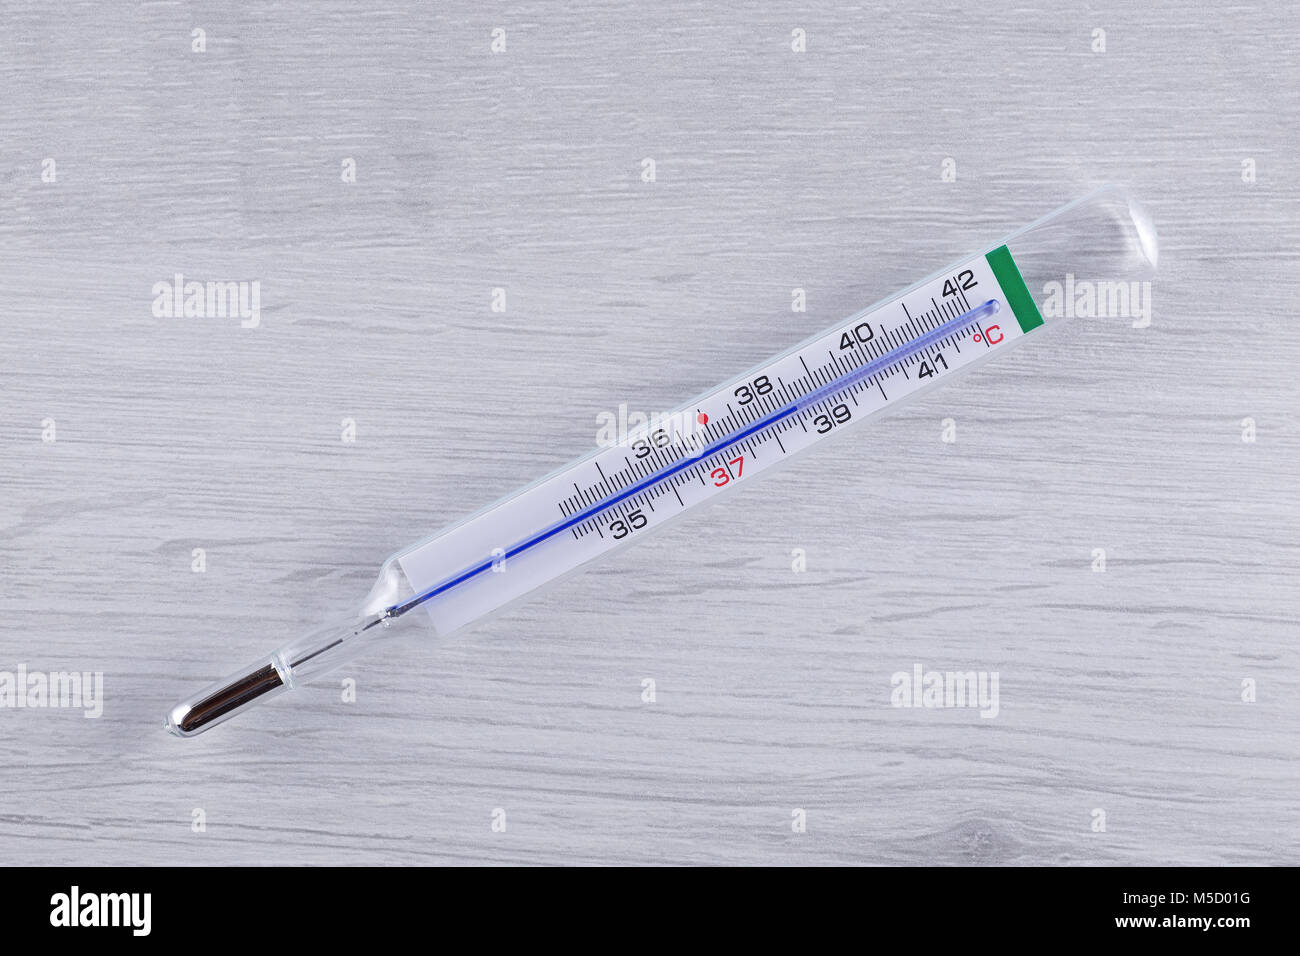 https://c8.alamy.com/comp/M5D01G/a-medical-thermometer-showing-a-high-temperature-M5D01G.jpg